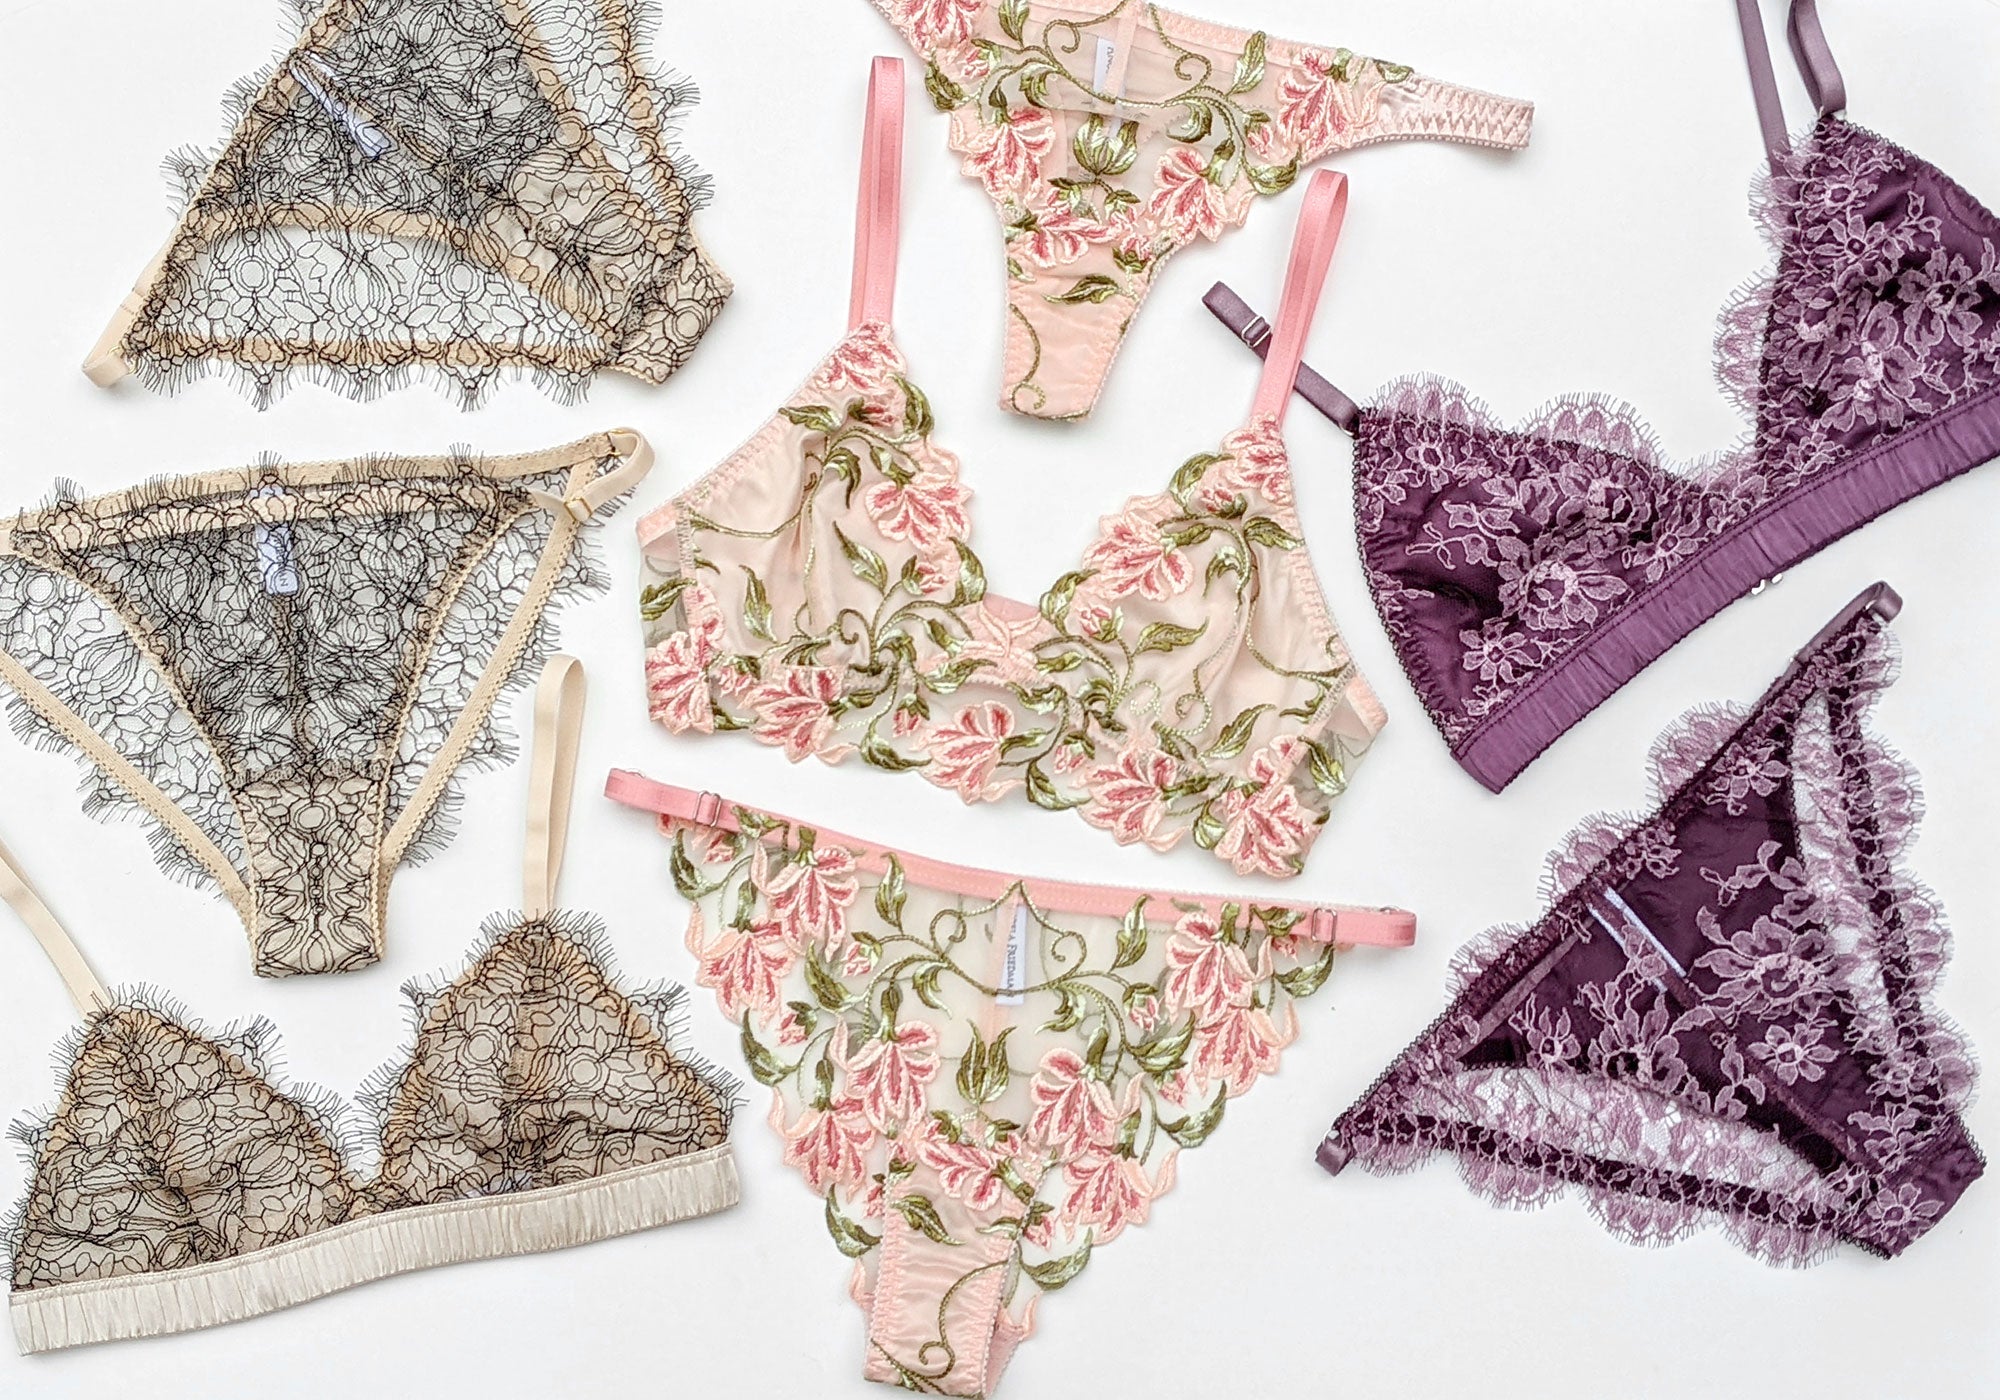 luxury lingerie sets in pink embroidery, real silk, and french lace